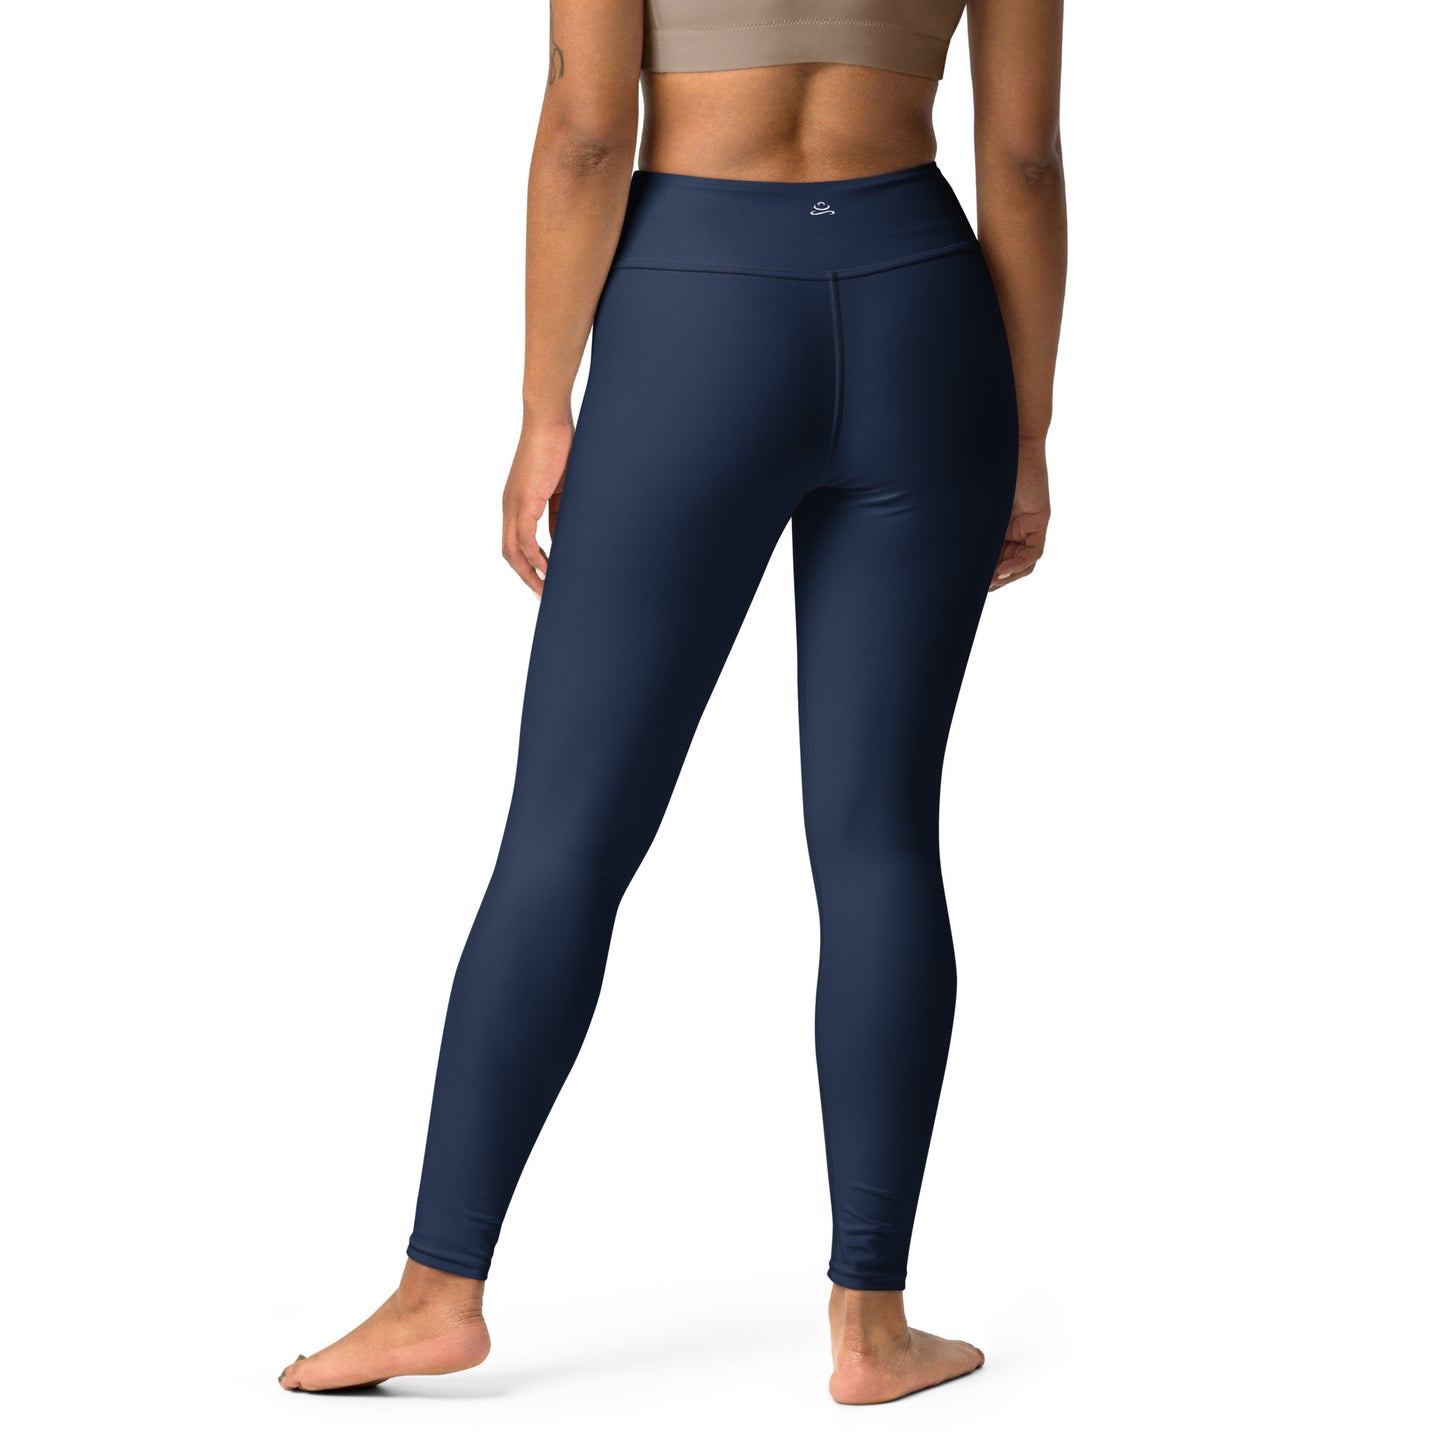 iniber High Waisted Yoga Pants with Pockets for India